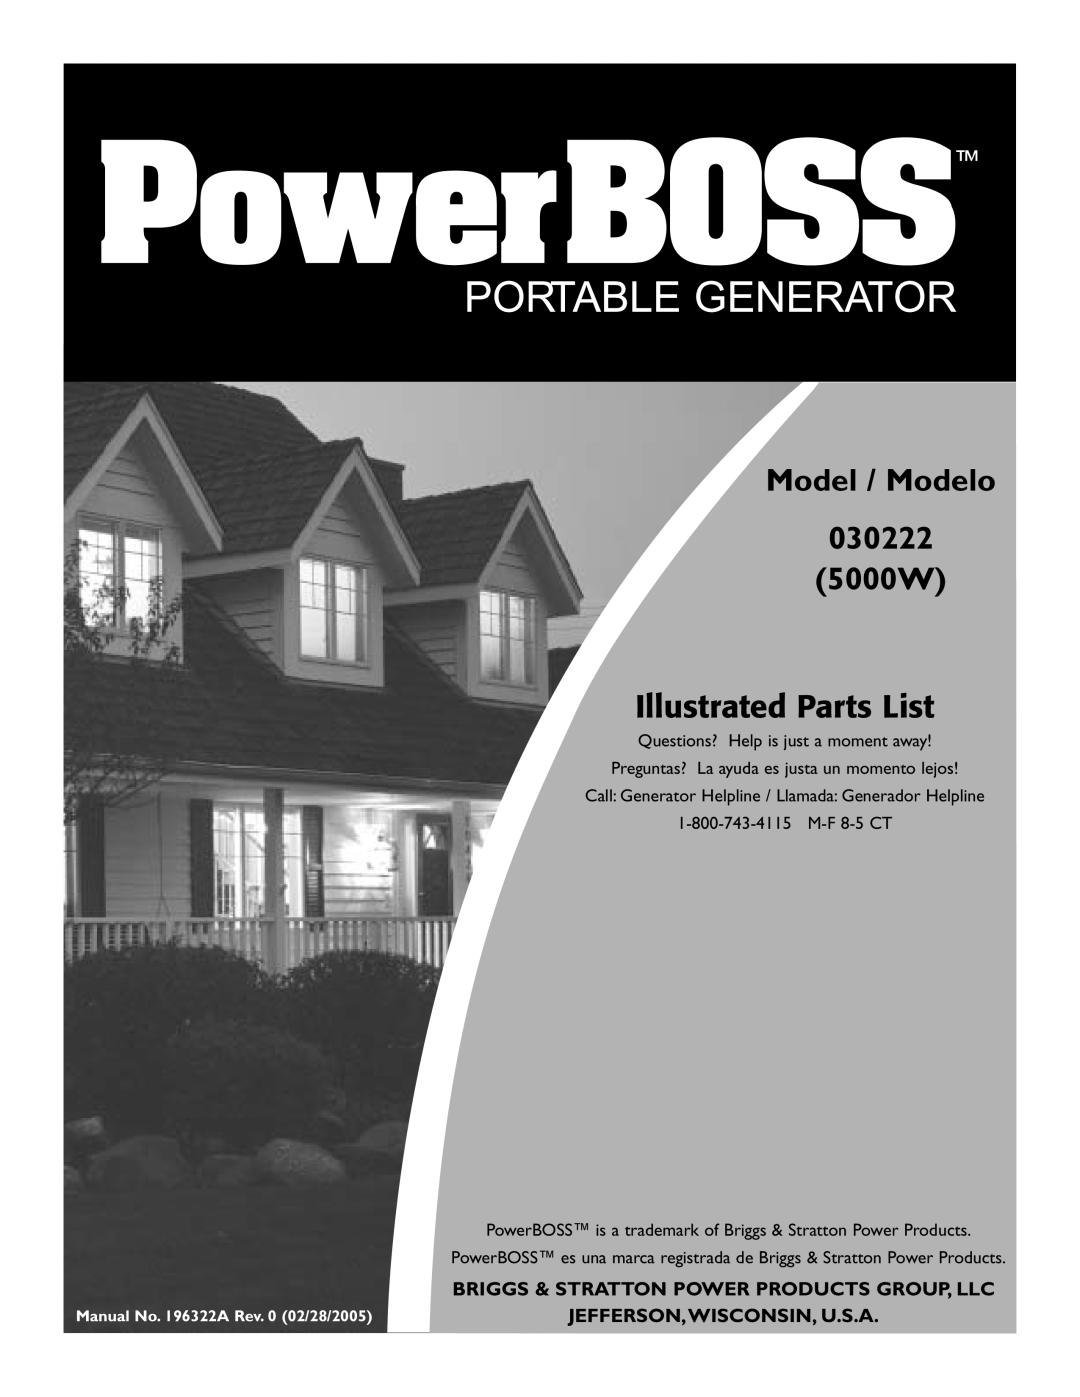 PowerBass manual Model / Modelo 030222 5000W, Illustrated Parts List, Briggs & Stratton Power Products Group, Llc 